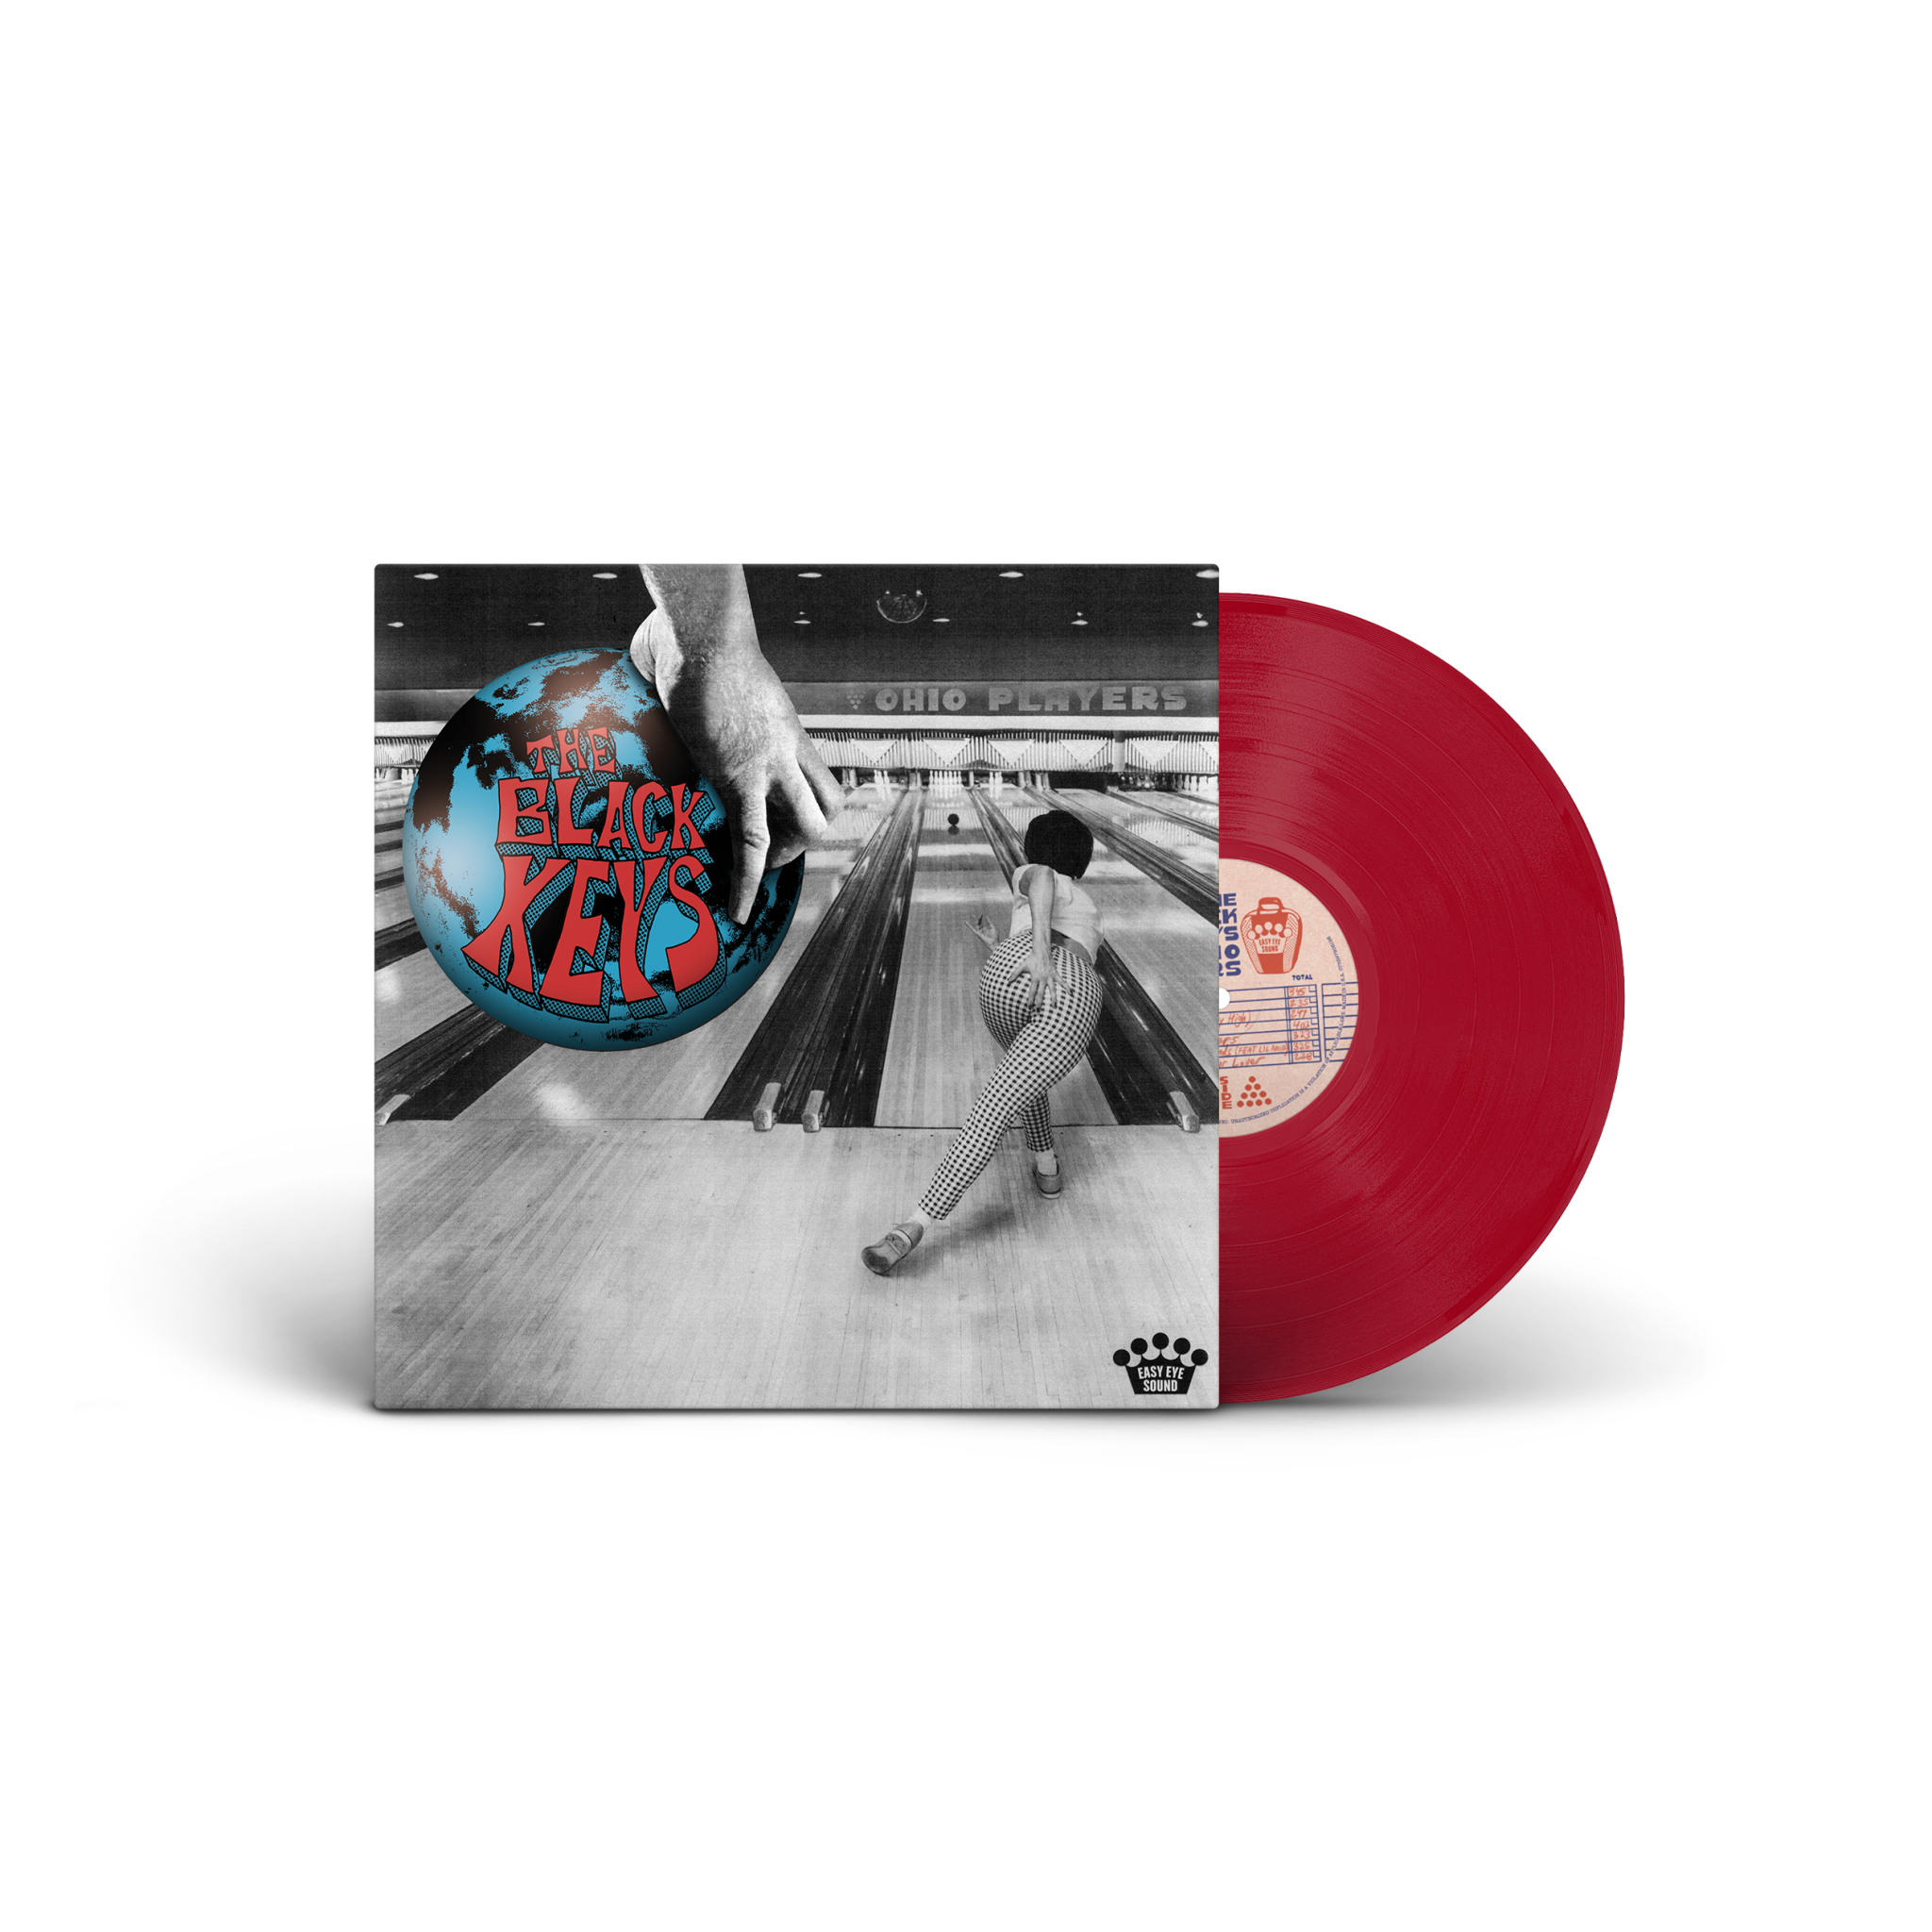 Order The Black Keys - Ohio Players (Indie Exclusive, Limited Edition Apple Red Vinyl)